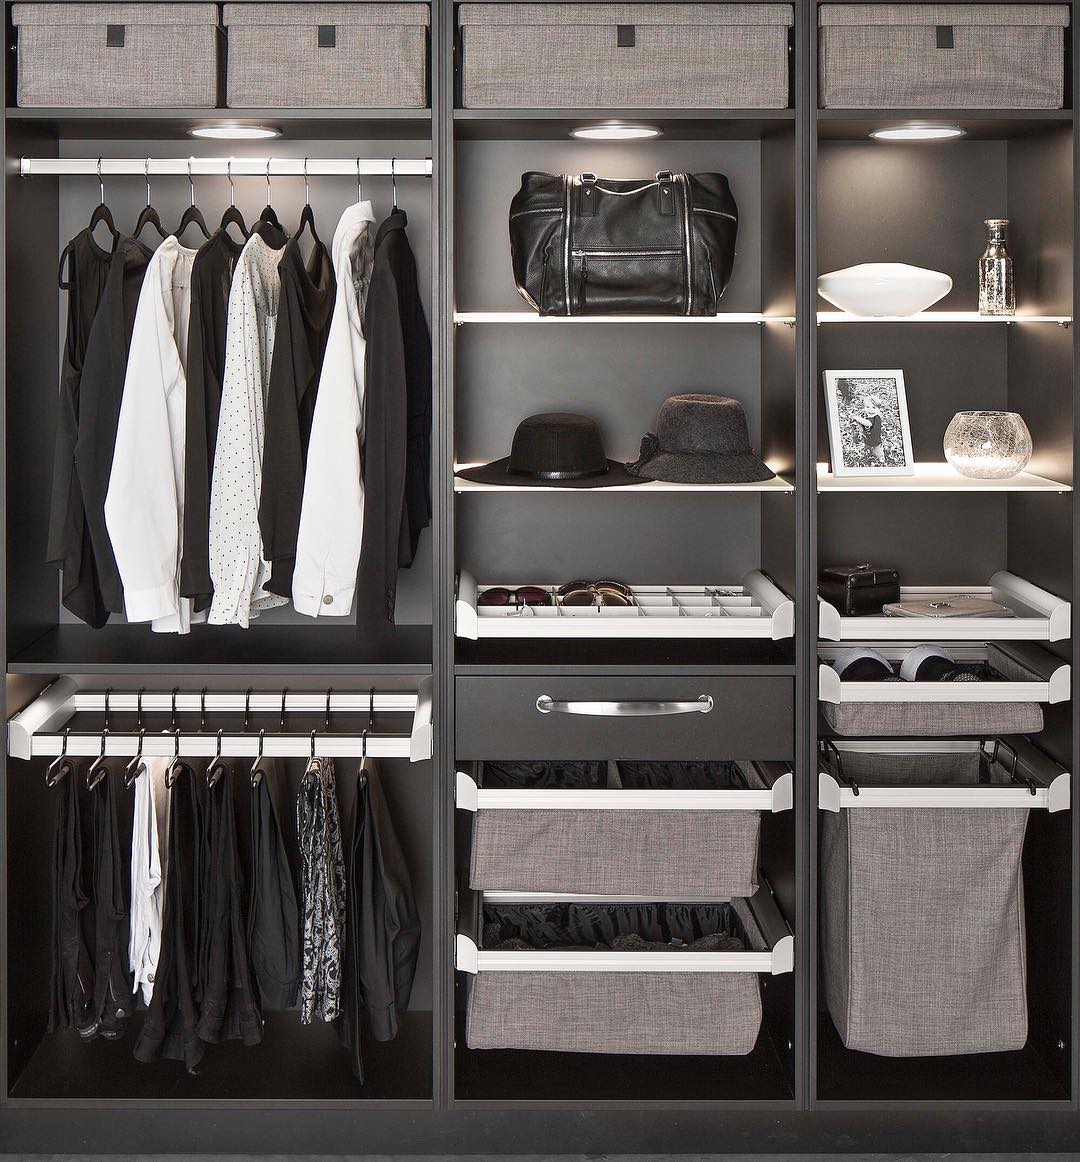 Closet with Bins and Baskets to Store Clothes and Shoes. Photo by Instagram user @hafeleamerica